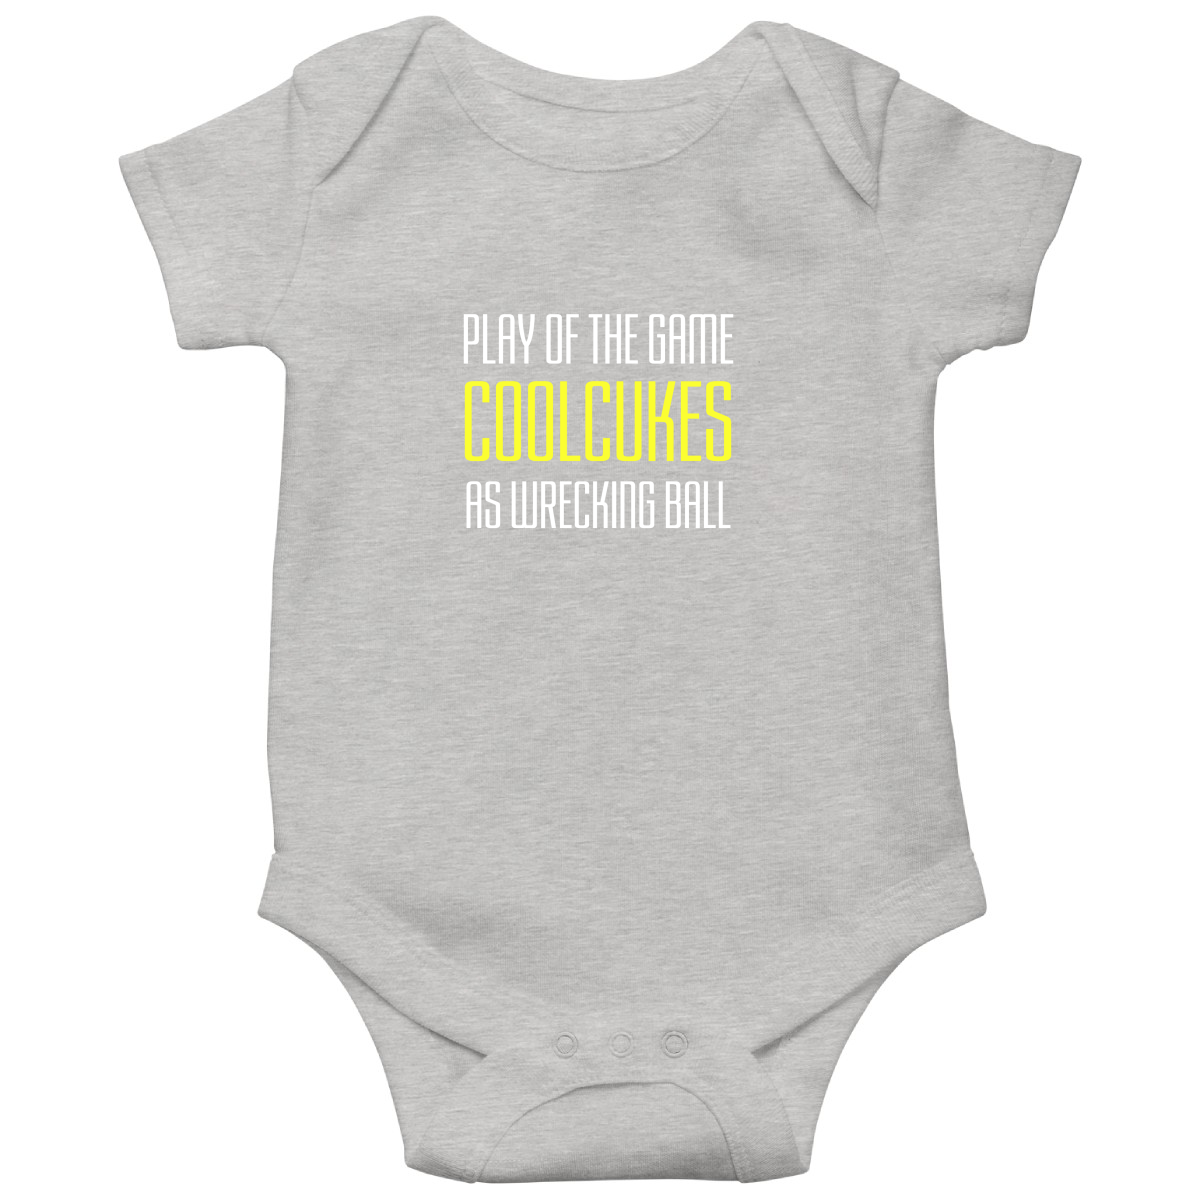 Play of the Game Baby Bodysuits